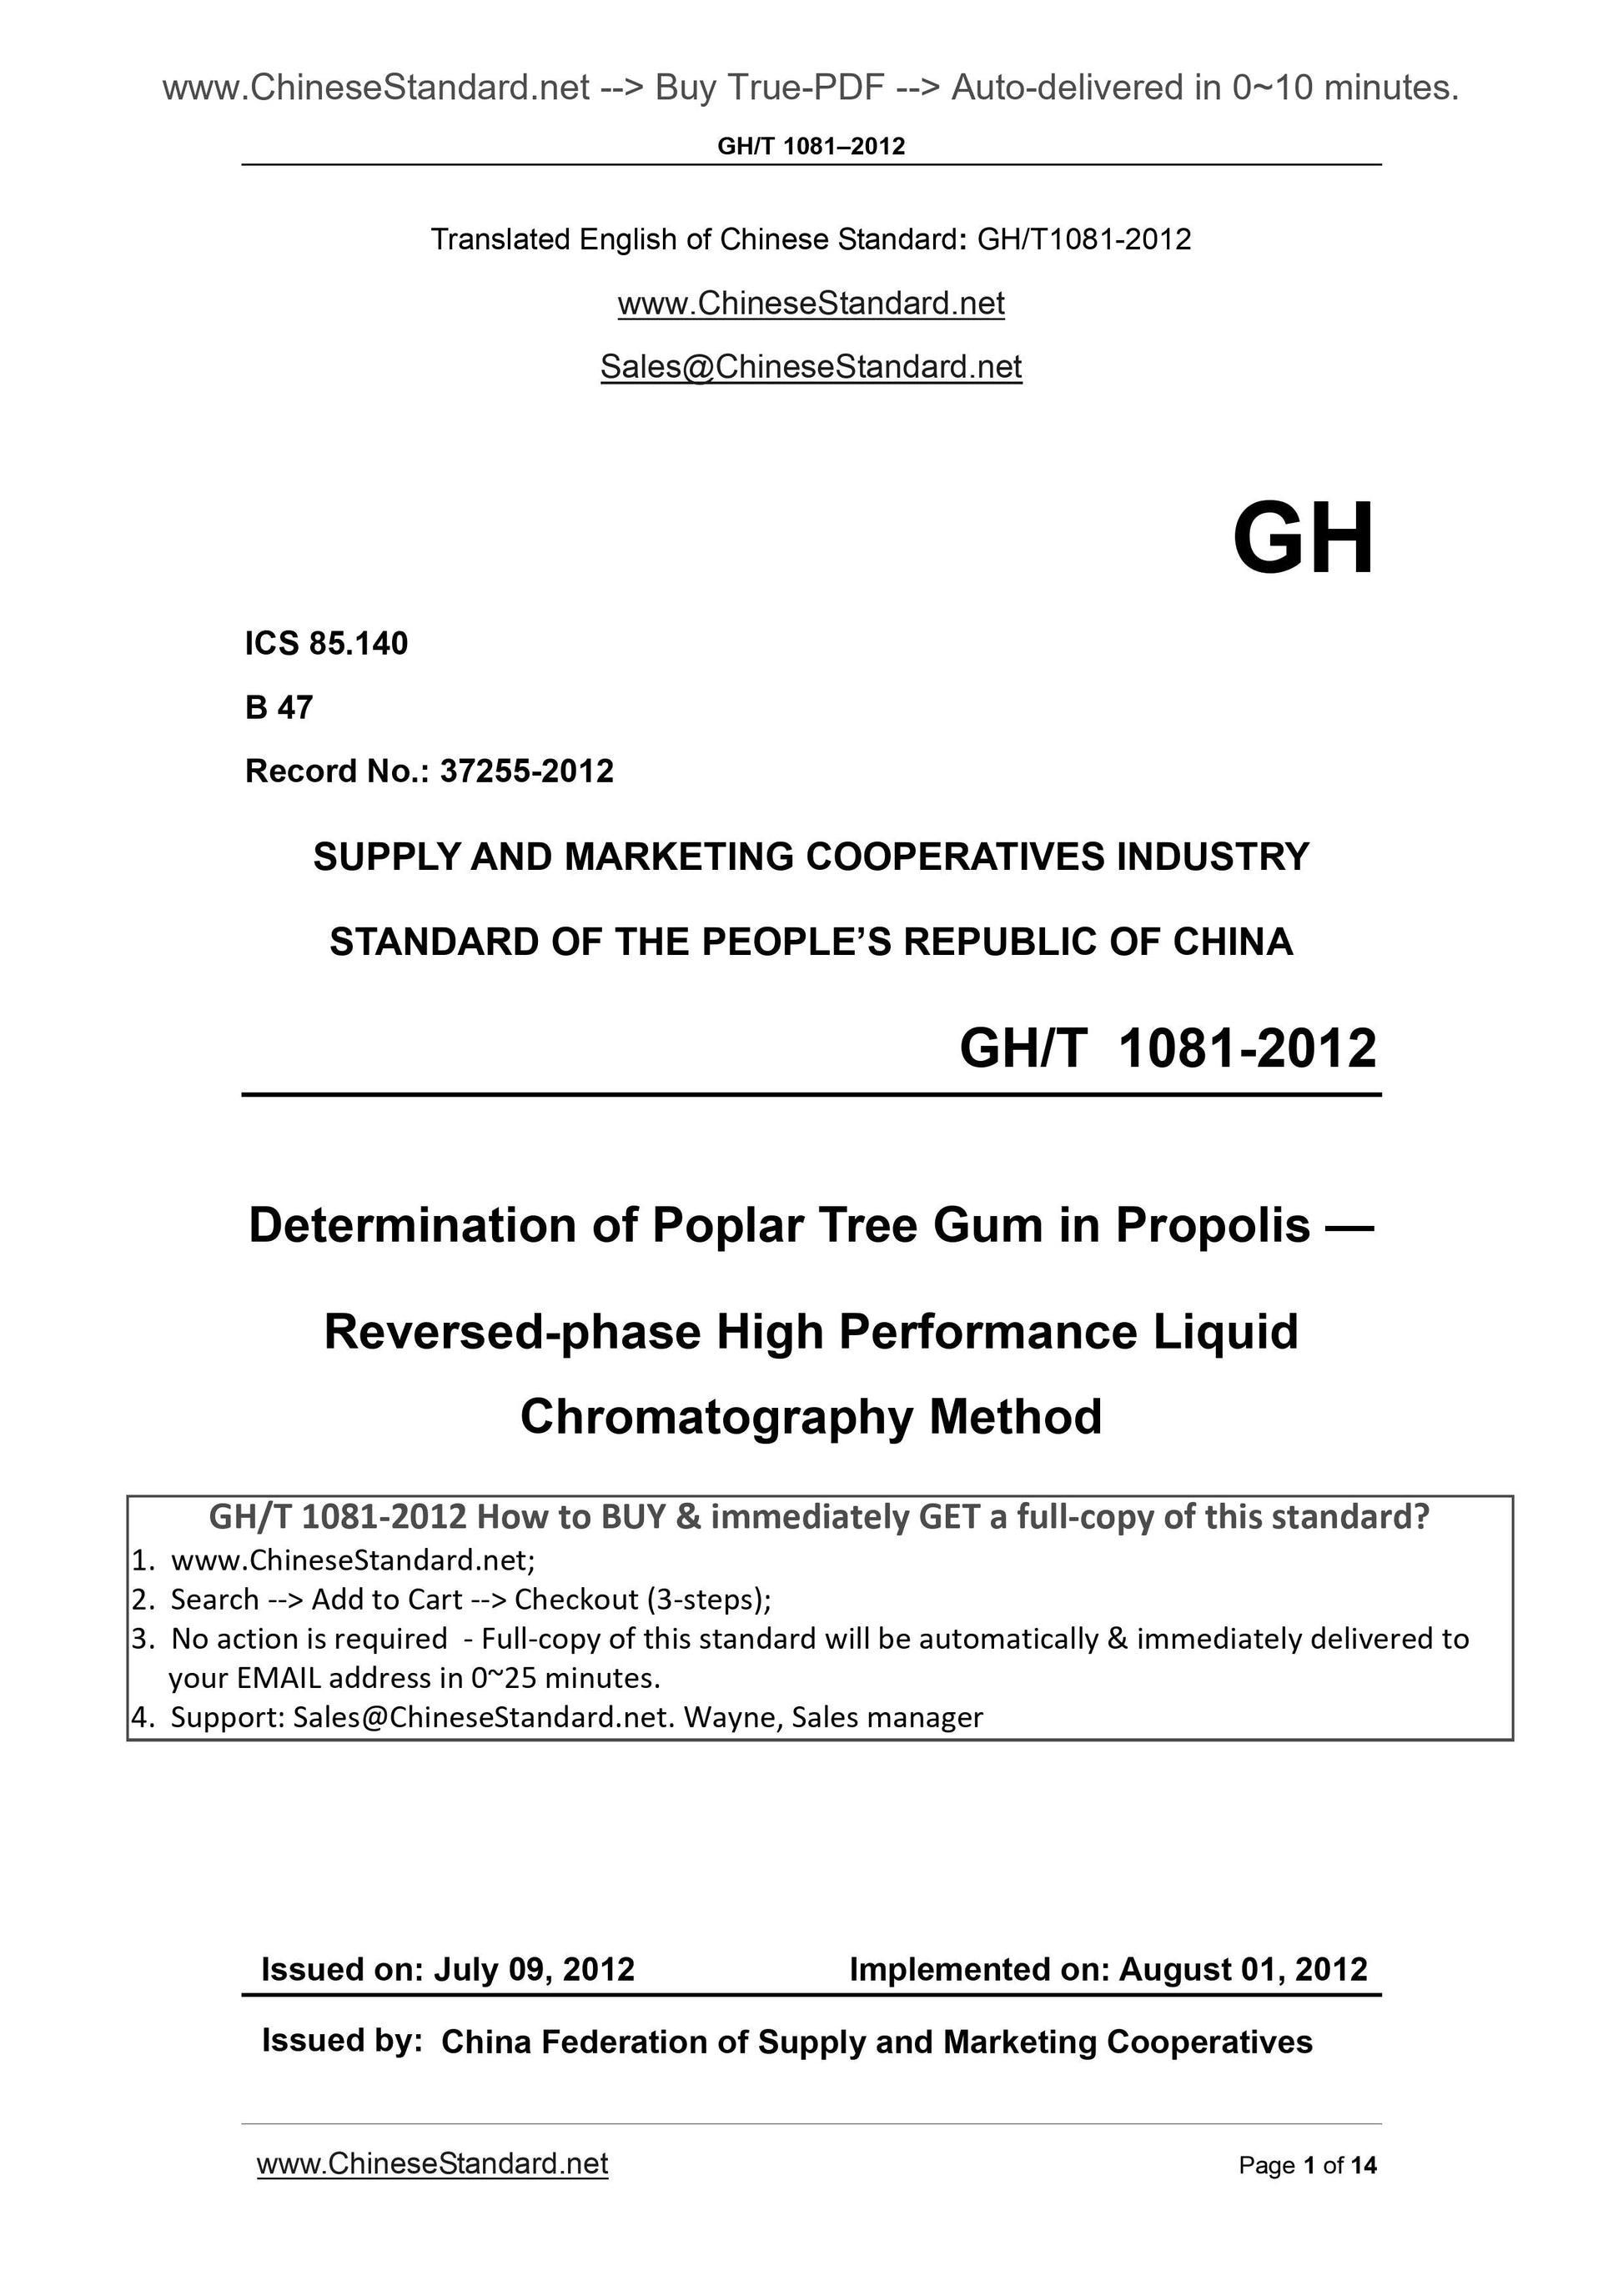 GH/T 1081-2012 Page 1